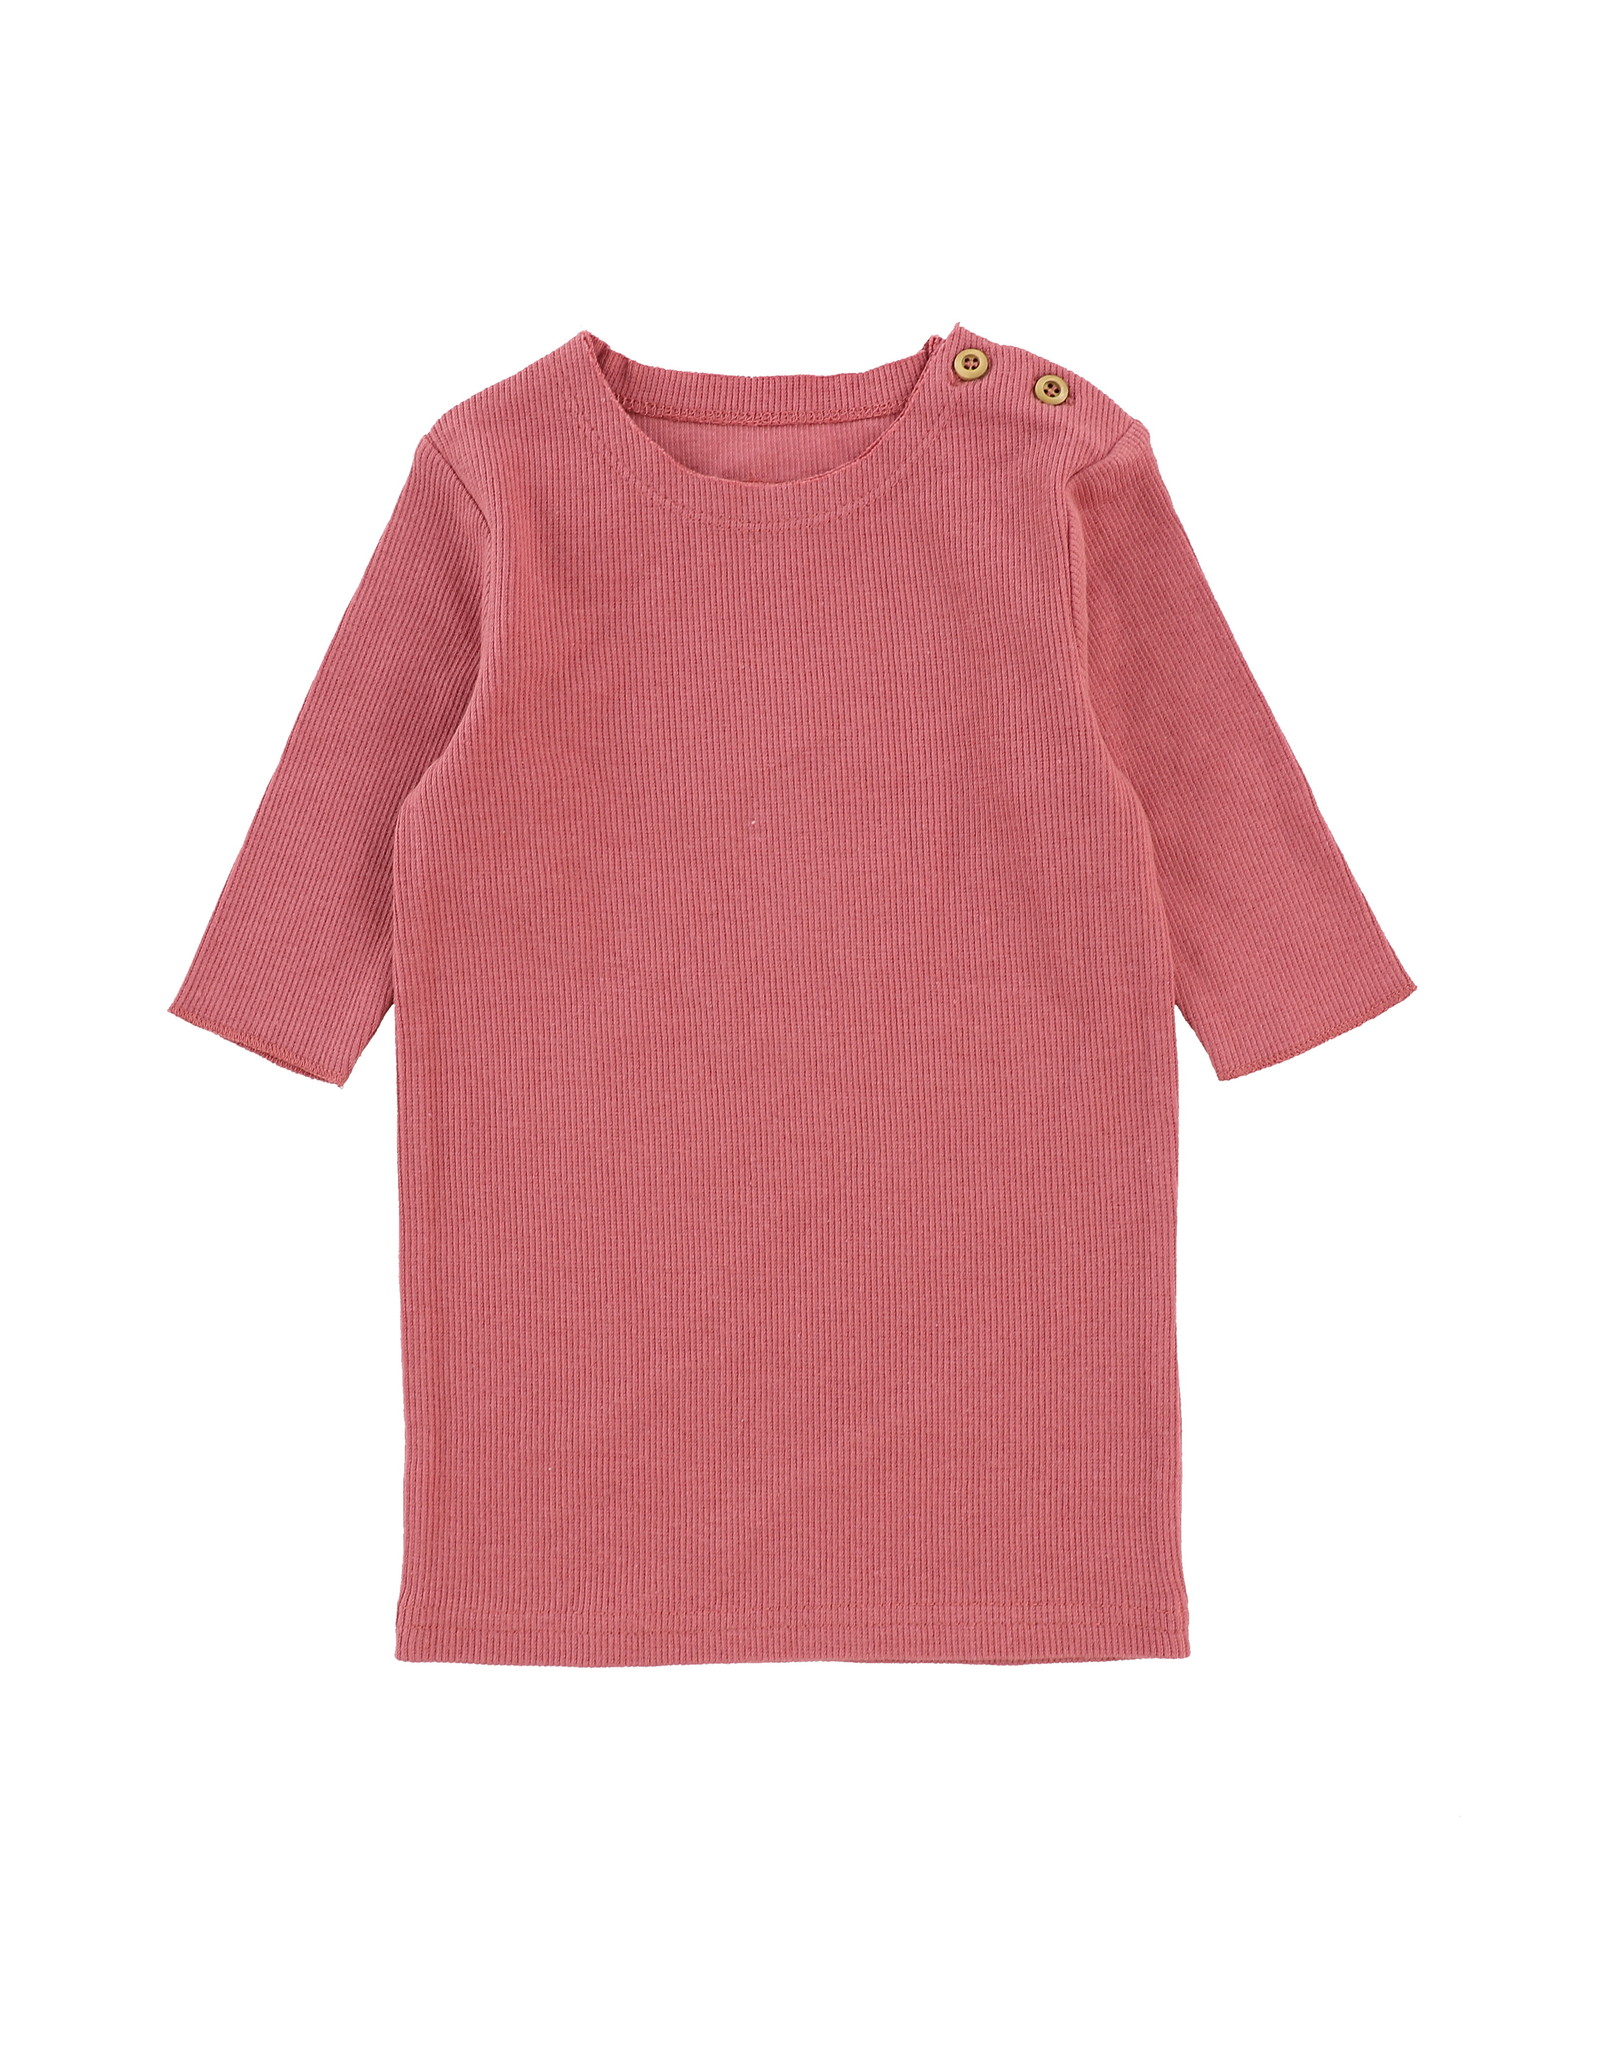 LIL LEGS SS20 3/4 Sleeve Ribbed T-Shirt